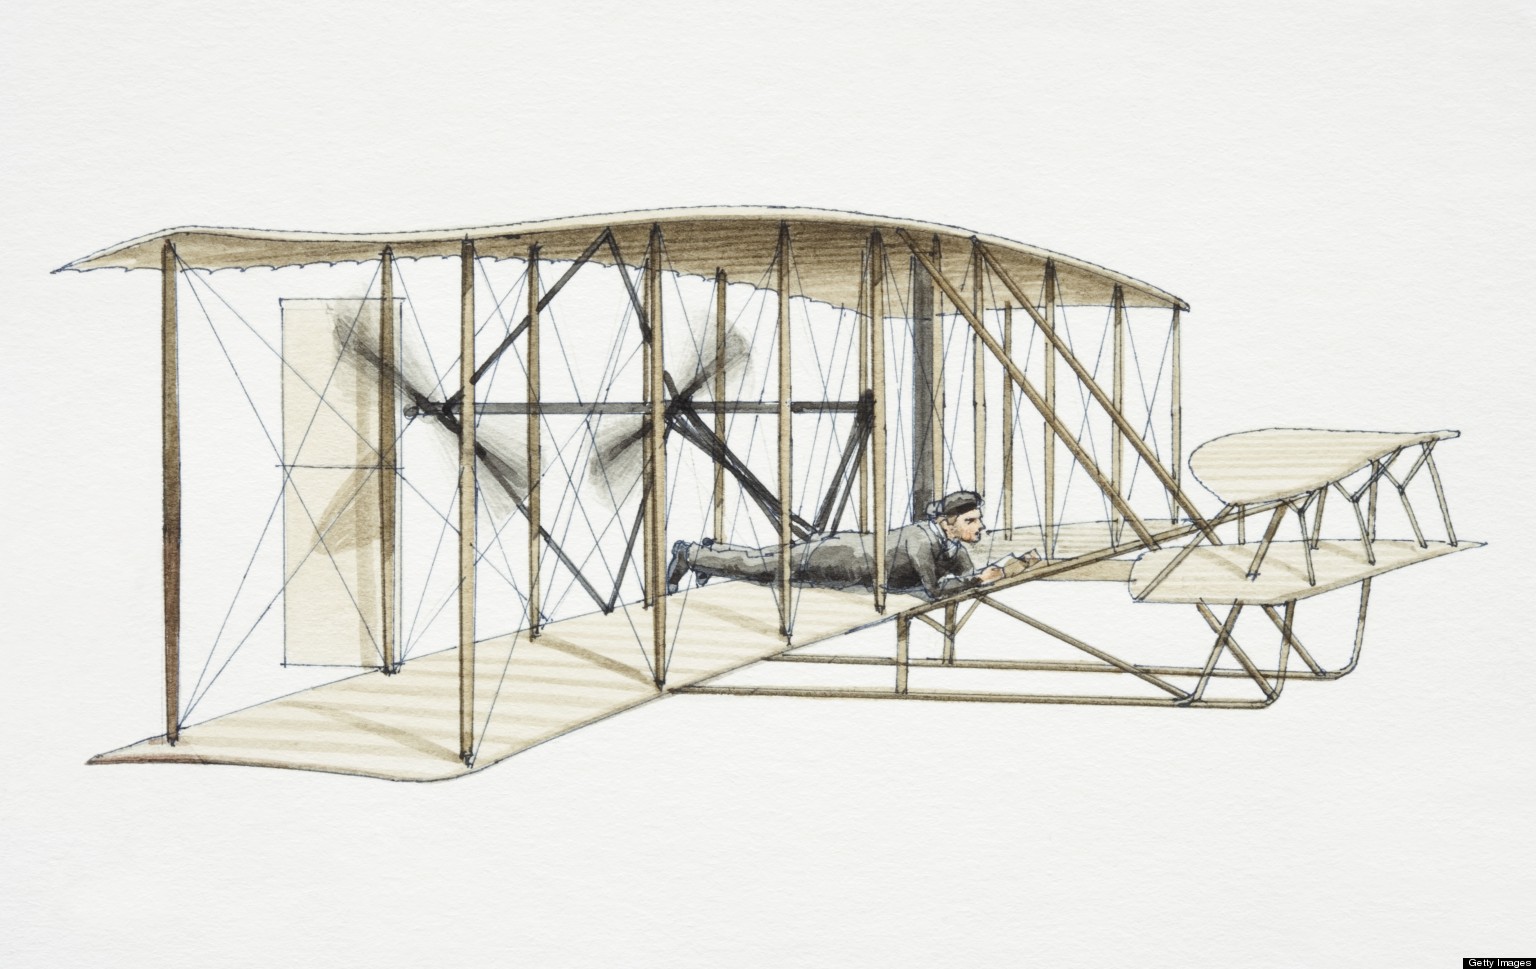 wright flyer clipart - photo #4